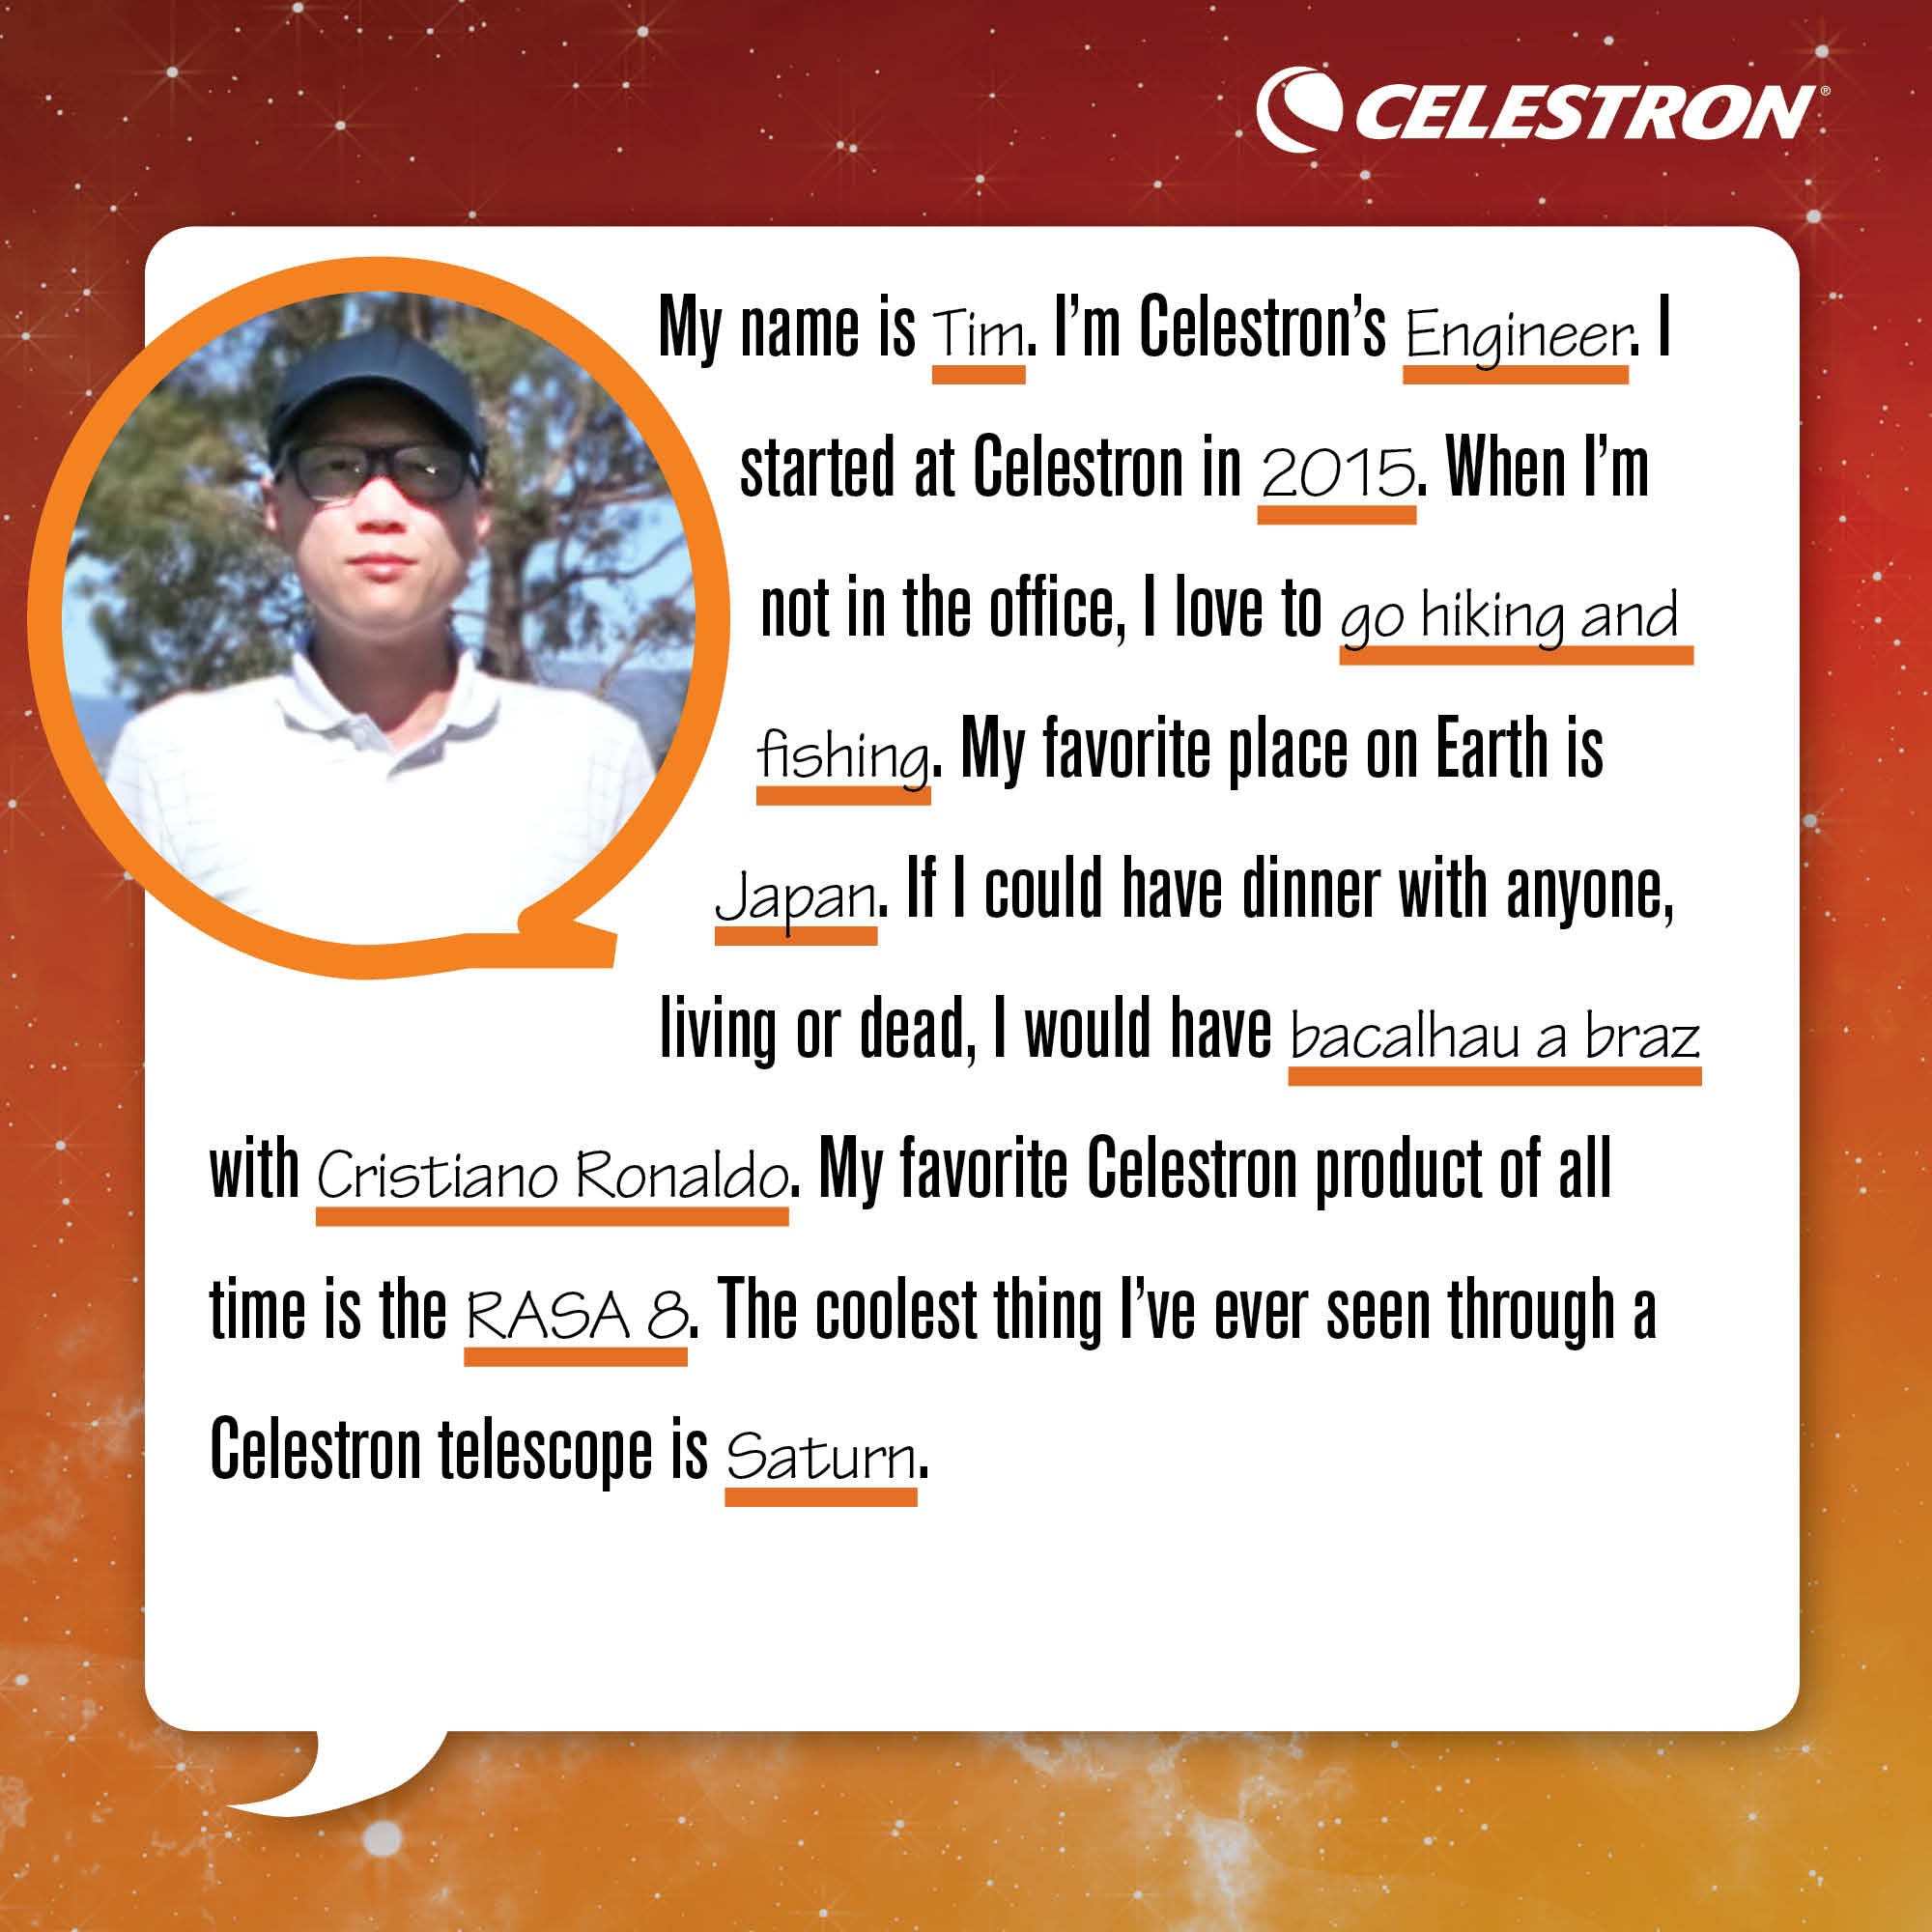 My name is Tim. I'm Celestron's Engineer. I started at Celestron in 2015. When I'm not in the office, I love to go hiking and fishing.  My favorite place on Earth is Japan. If I could have dinner with anyone, living or dead, I would have bacalhau a braz with Cristiano Ronaldo. My favorite Celestron product of all time is the RASA 8. The coolest thing I've ever seen through a Celestron telescope is Saturn.